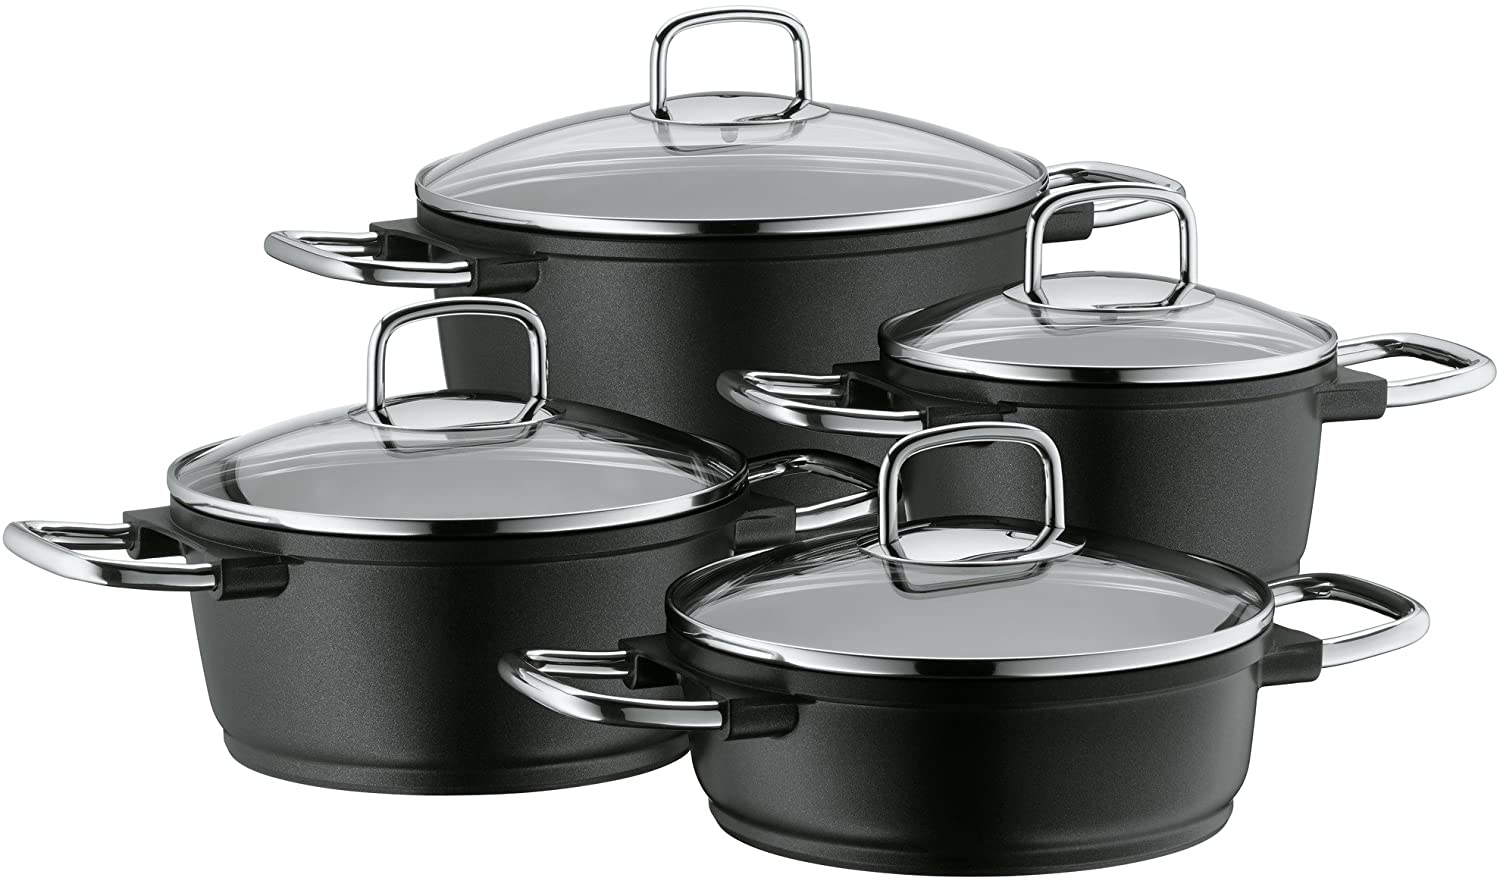 WMF Bueno Induction Cookware Set of 4 with Glass Lid and Saucepan Cast Aluminium Coating Suitable for Induction Cookers Dishwasher Safe